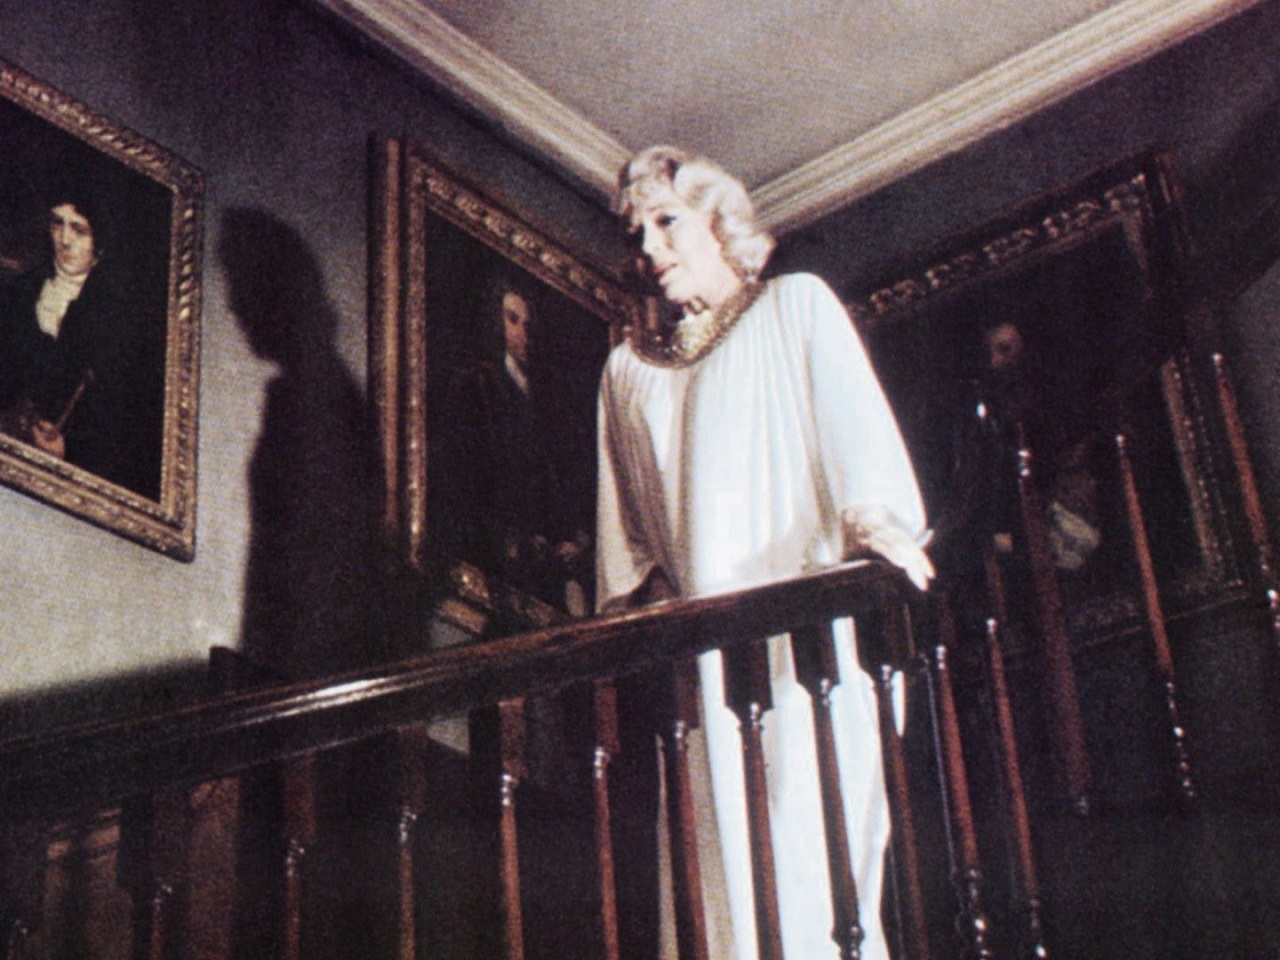 Lana Turner as Mrs Masters in Persecution (1974)